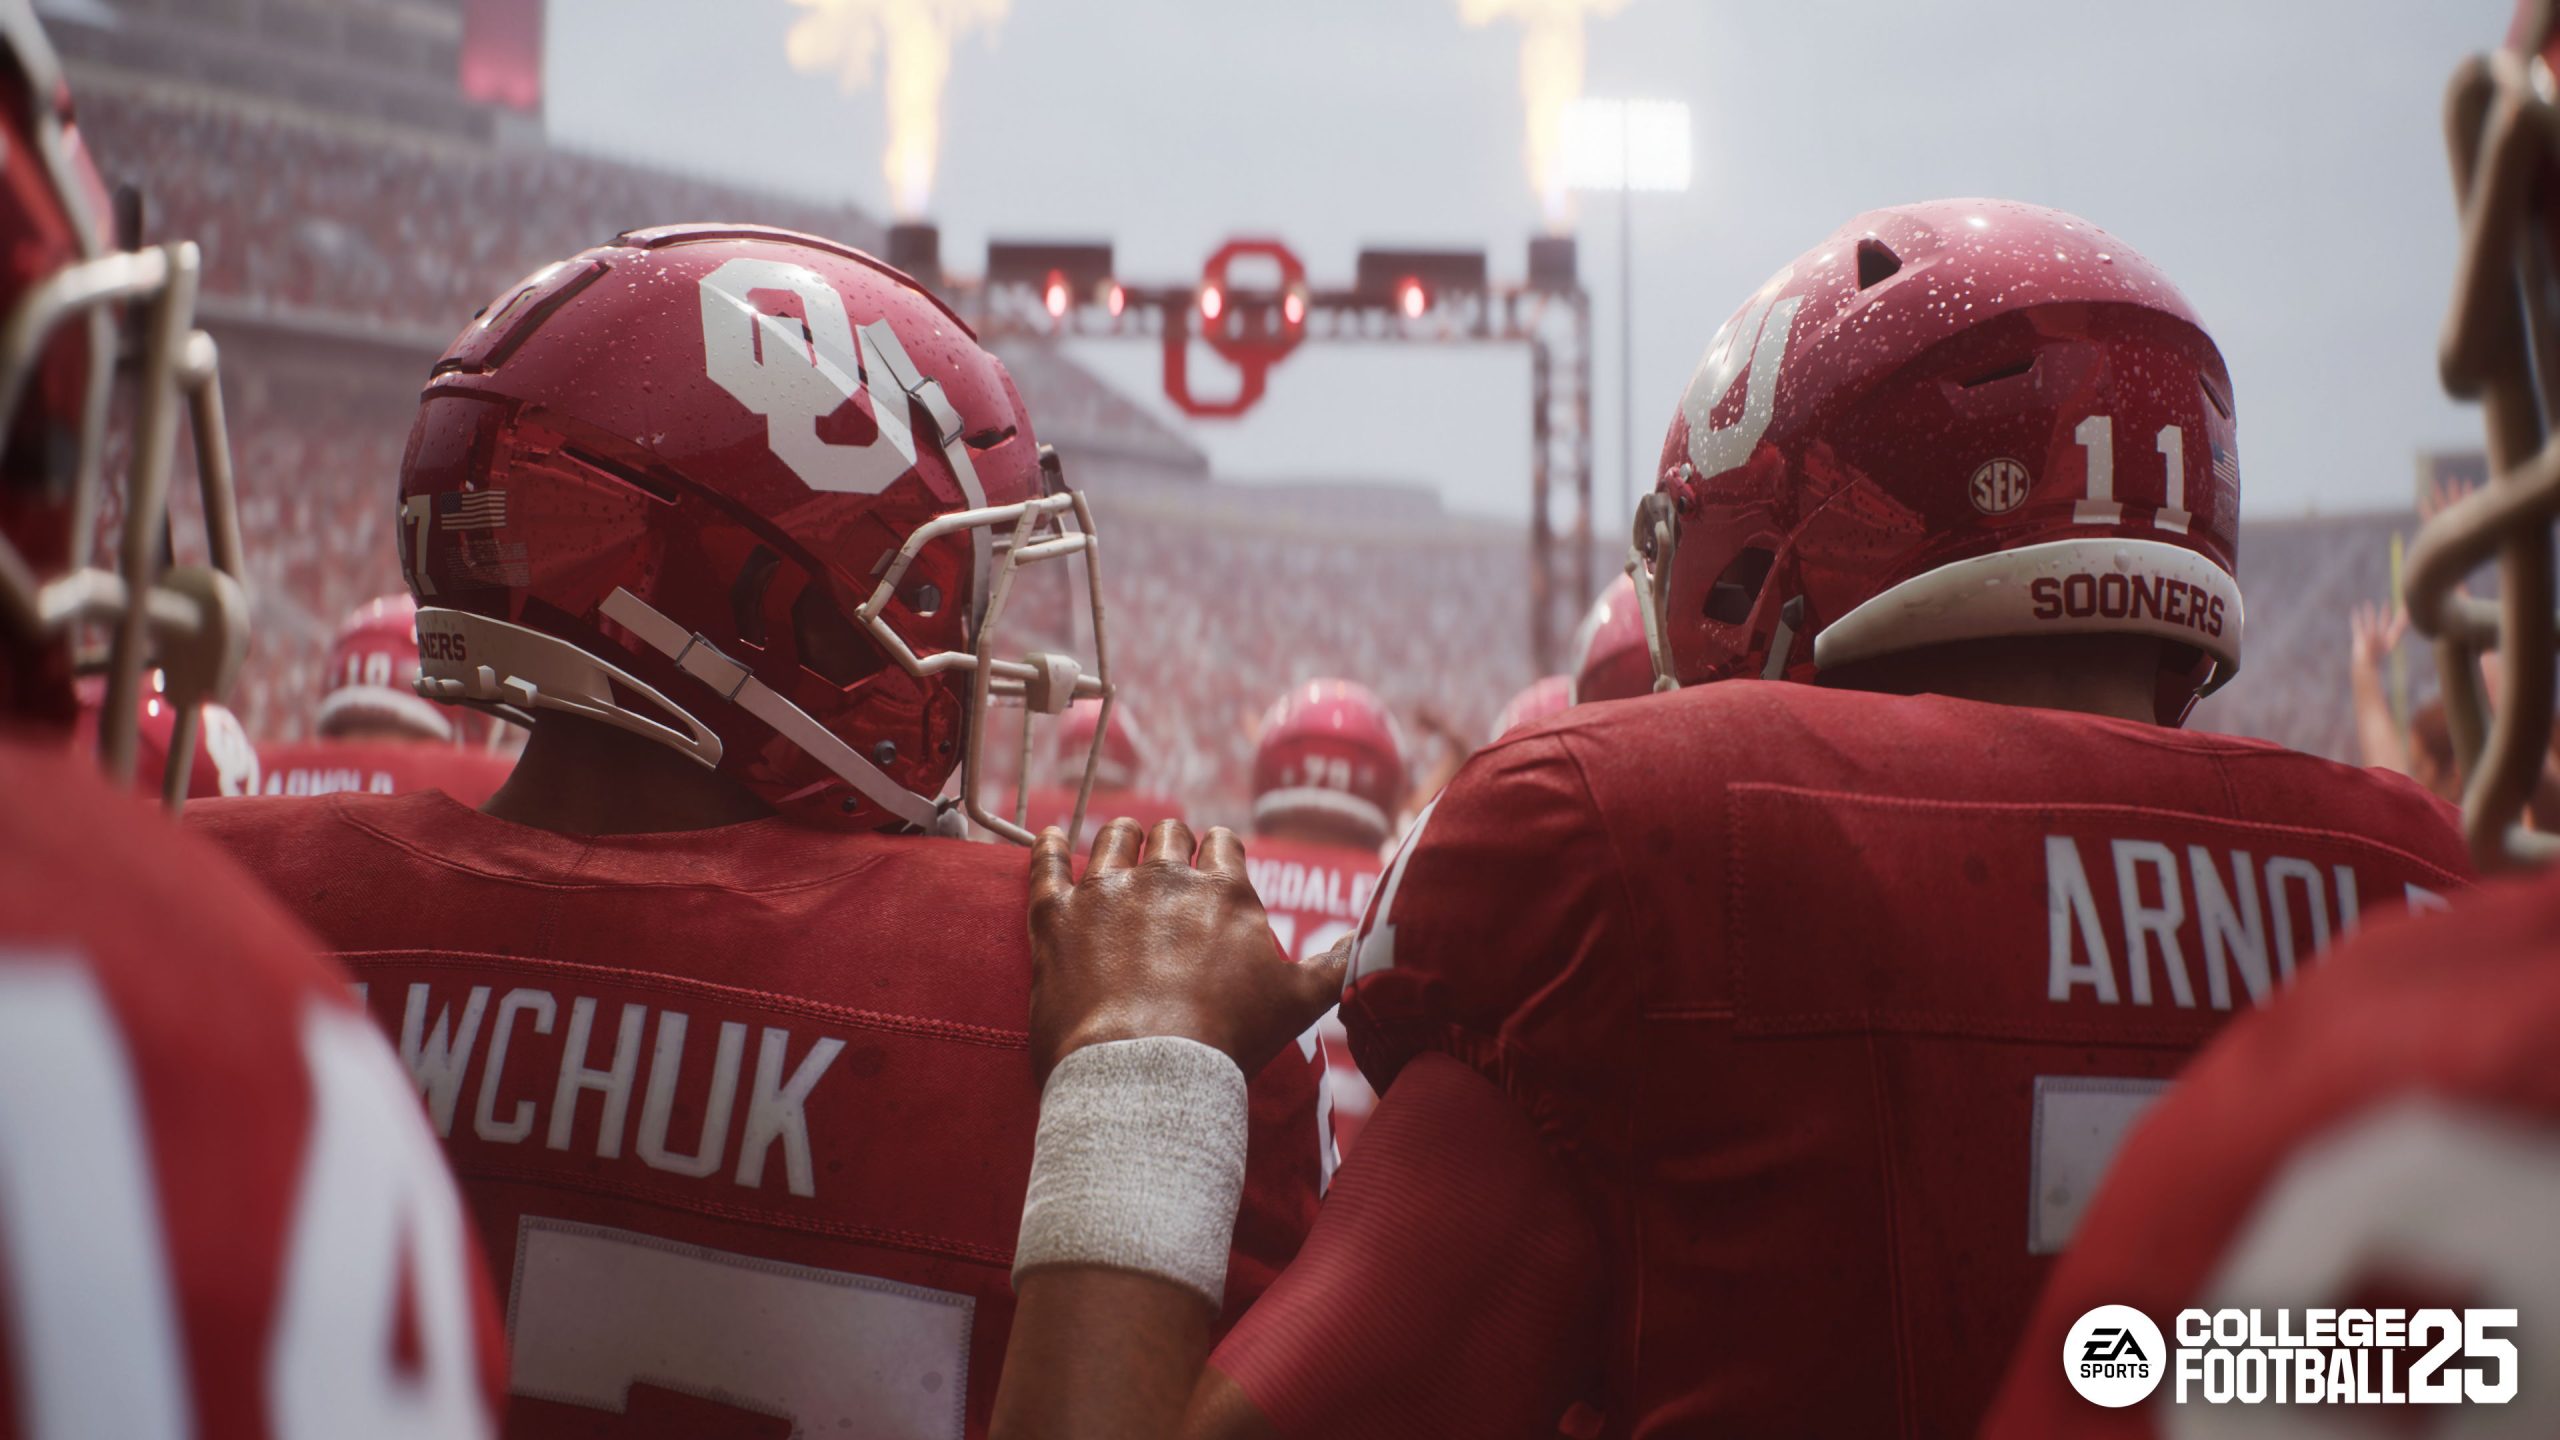 Teammates with the Oklahoma Sooners embrace before taking the field, in the rain, in EA Sports College Football 25. Pyrotechnics detonate in the distance.